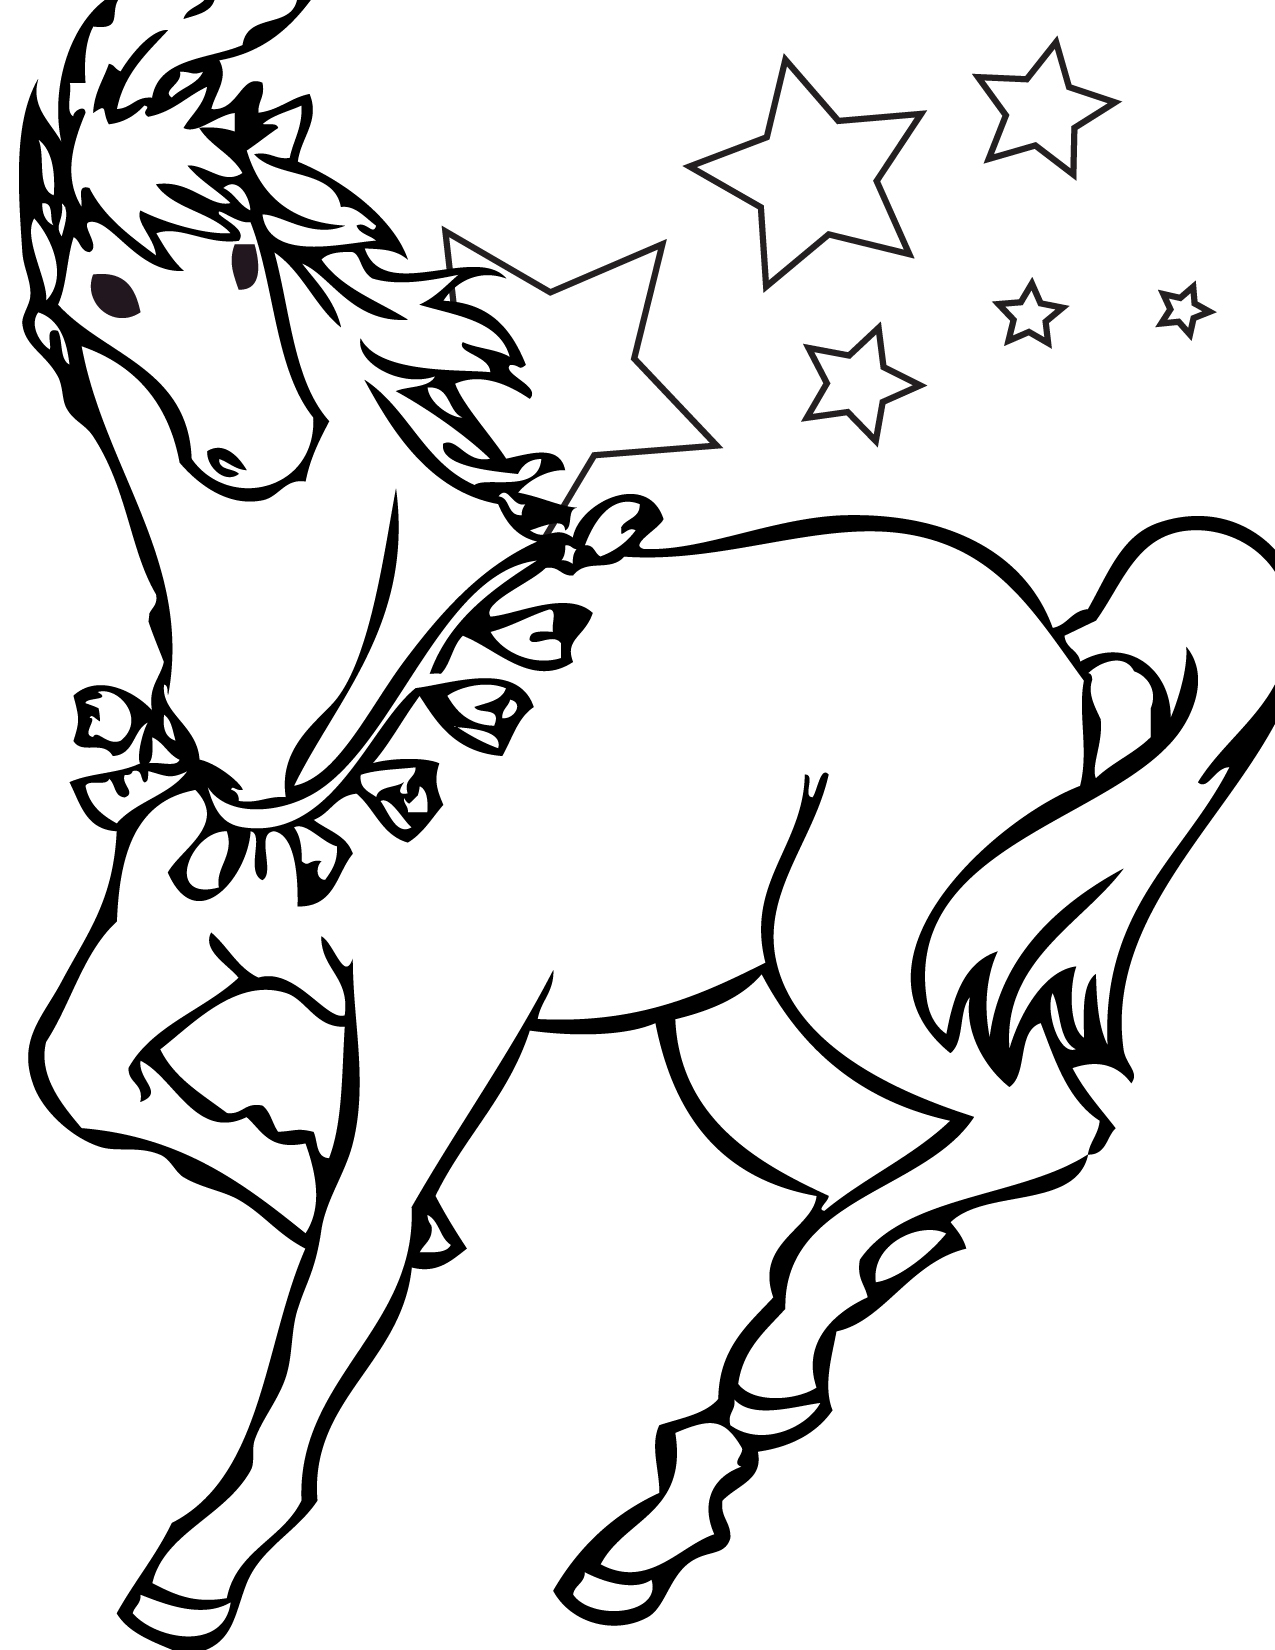 Gypsy Vanner Coloring Pages at GetDrawings | Free download